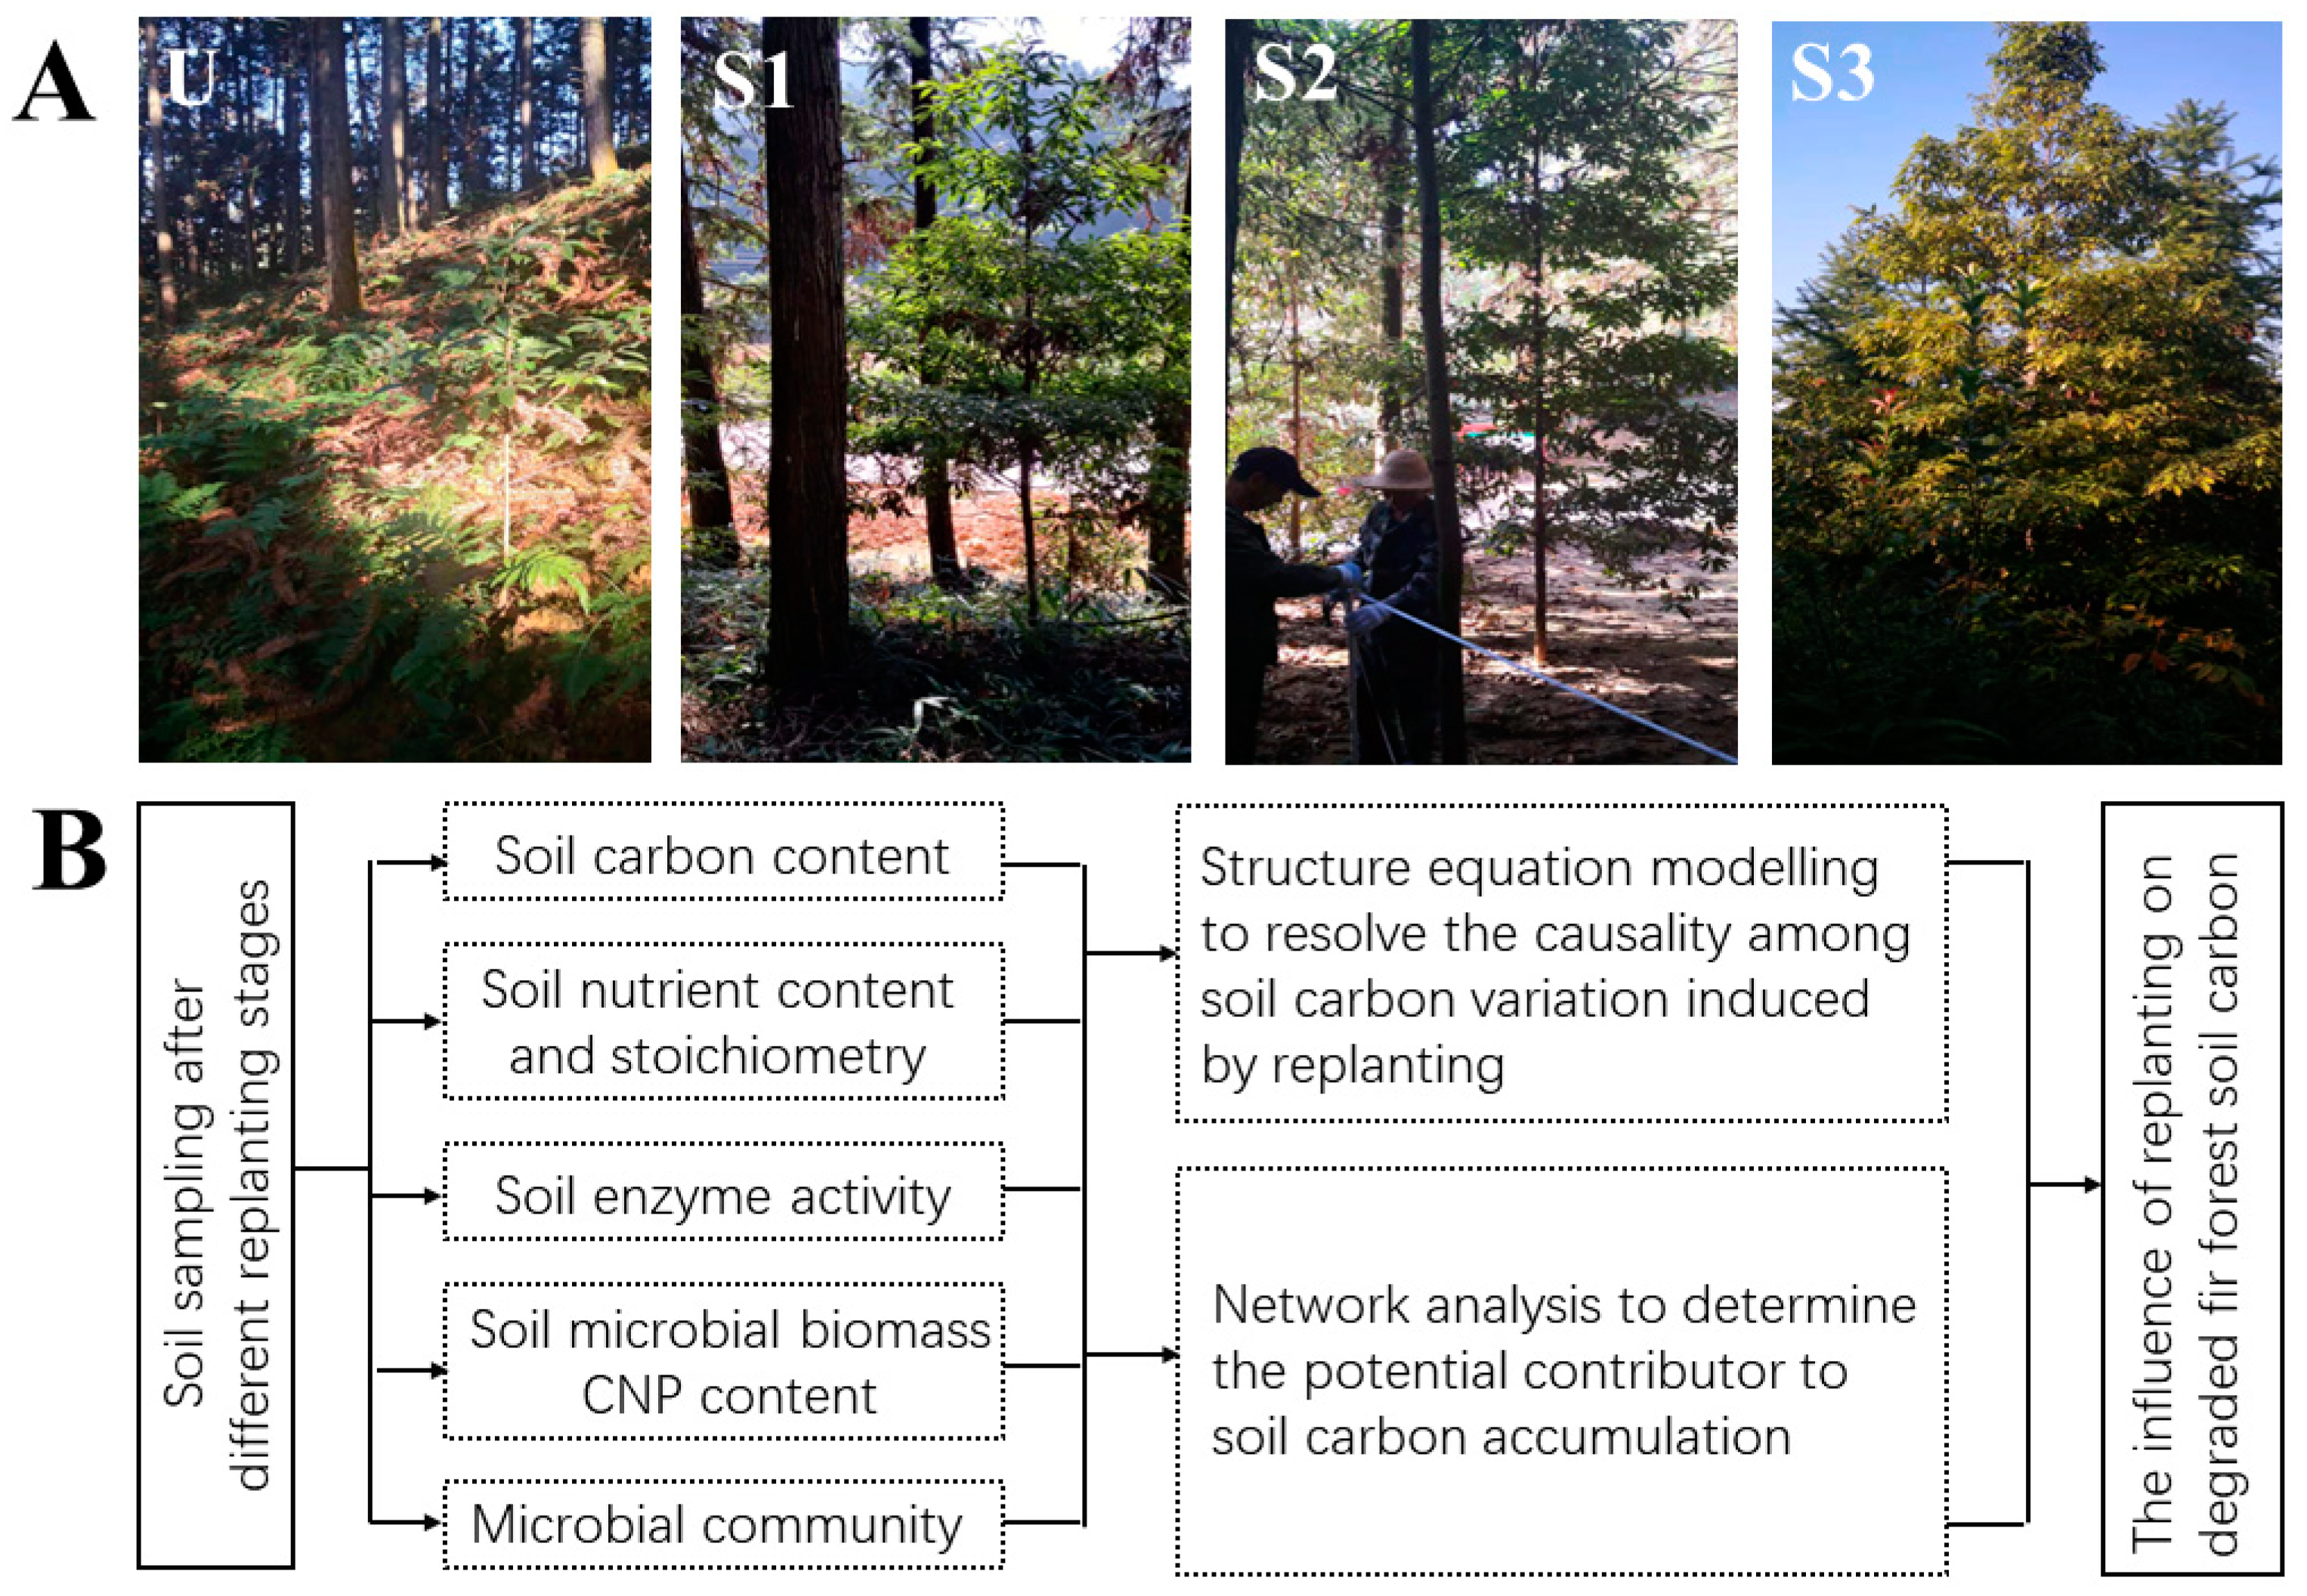 Forests | Free Full-Text | Influence of Phoebe bournei (Hemsl.) Replanting  on Soil Carbon Content and Microbial Processes in a Degraded Fir Forest